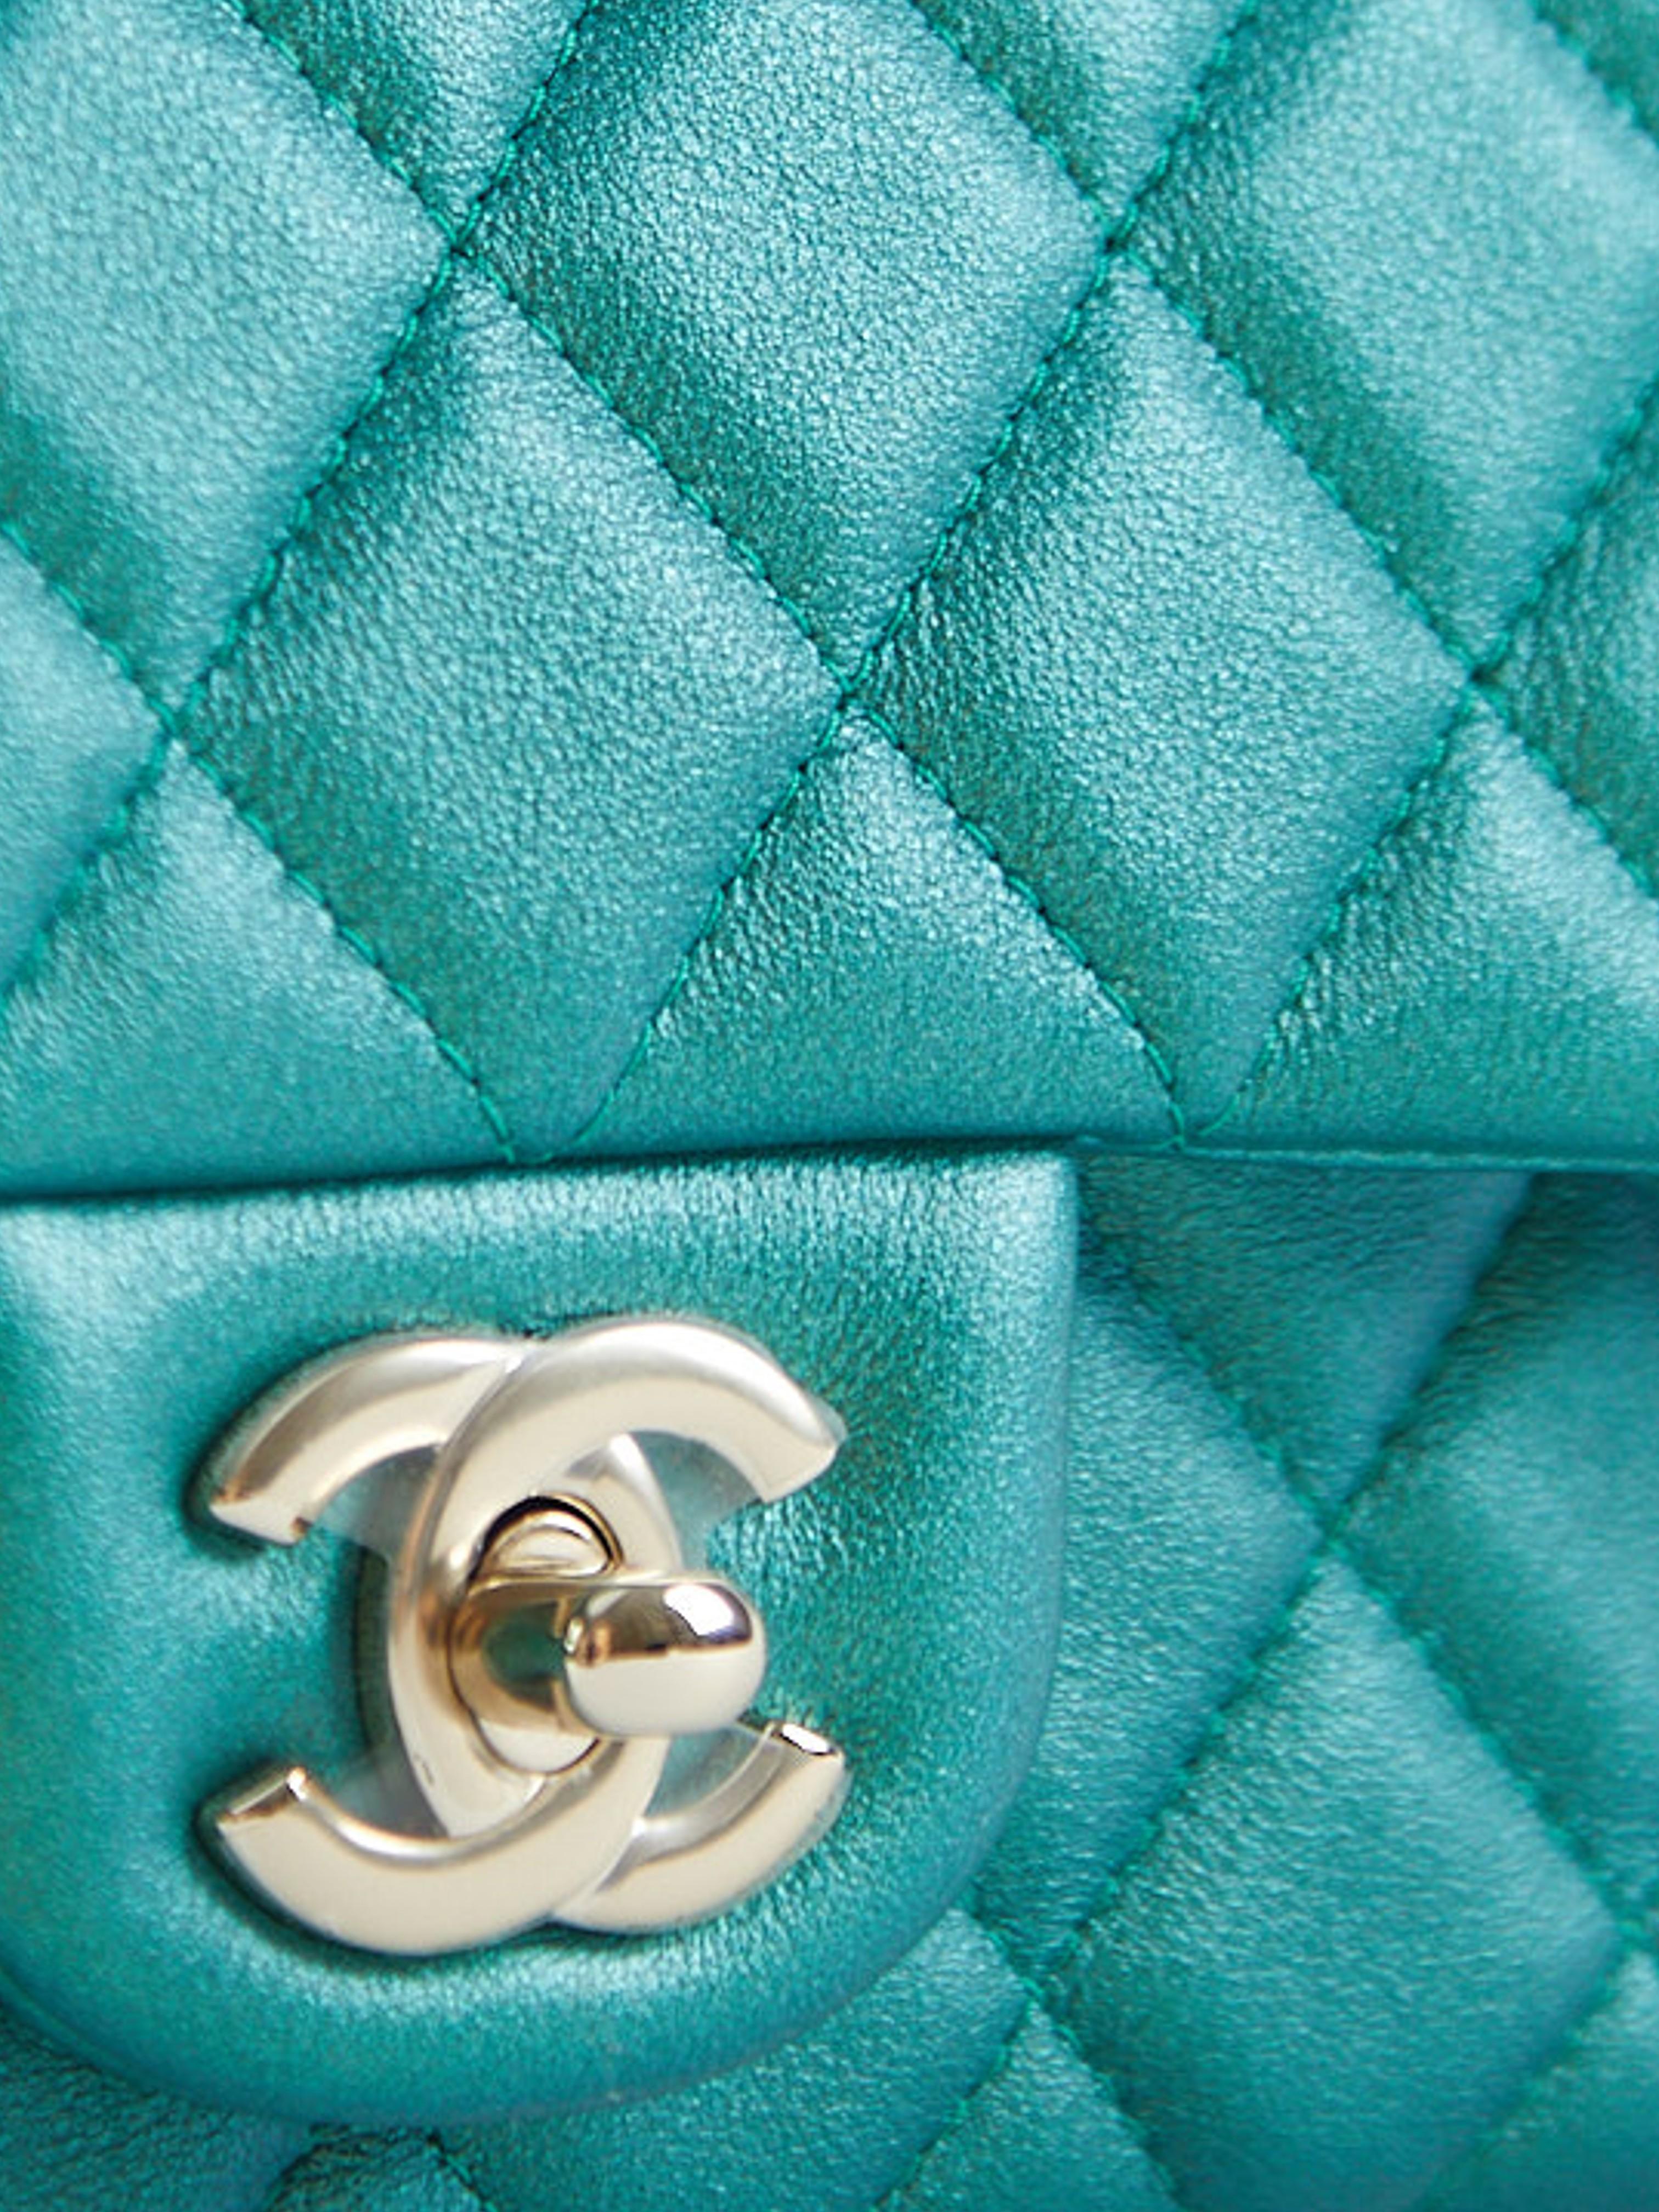 CHANEL MINI FLAP BAG PEARLESCENT GREEN Lambskin Leather with Champagne Hardware 2